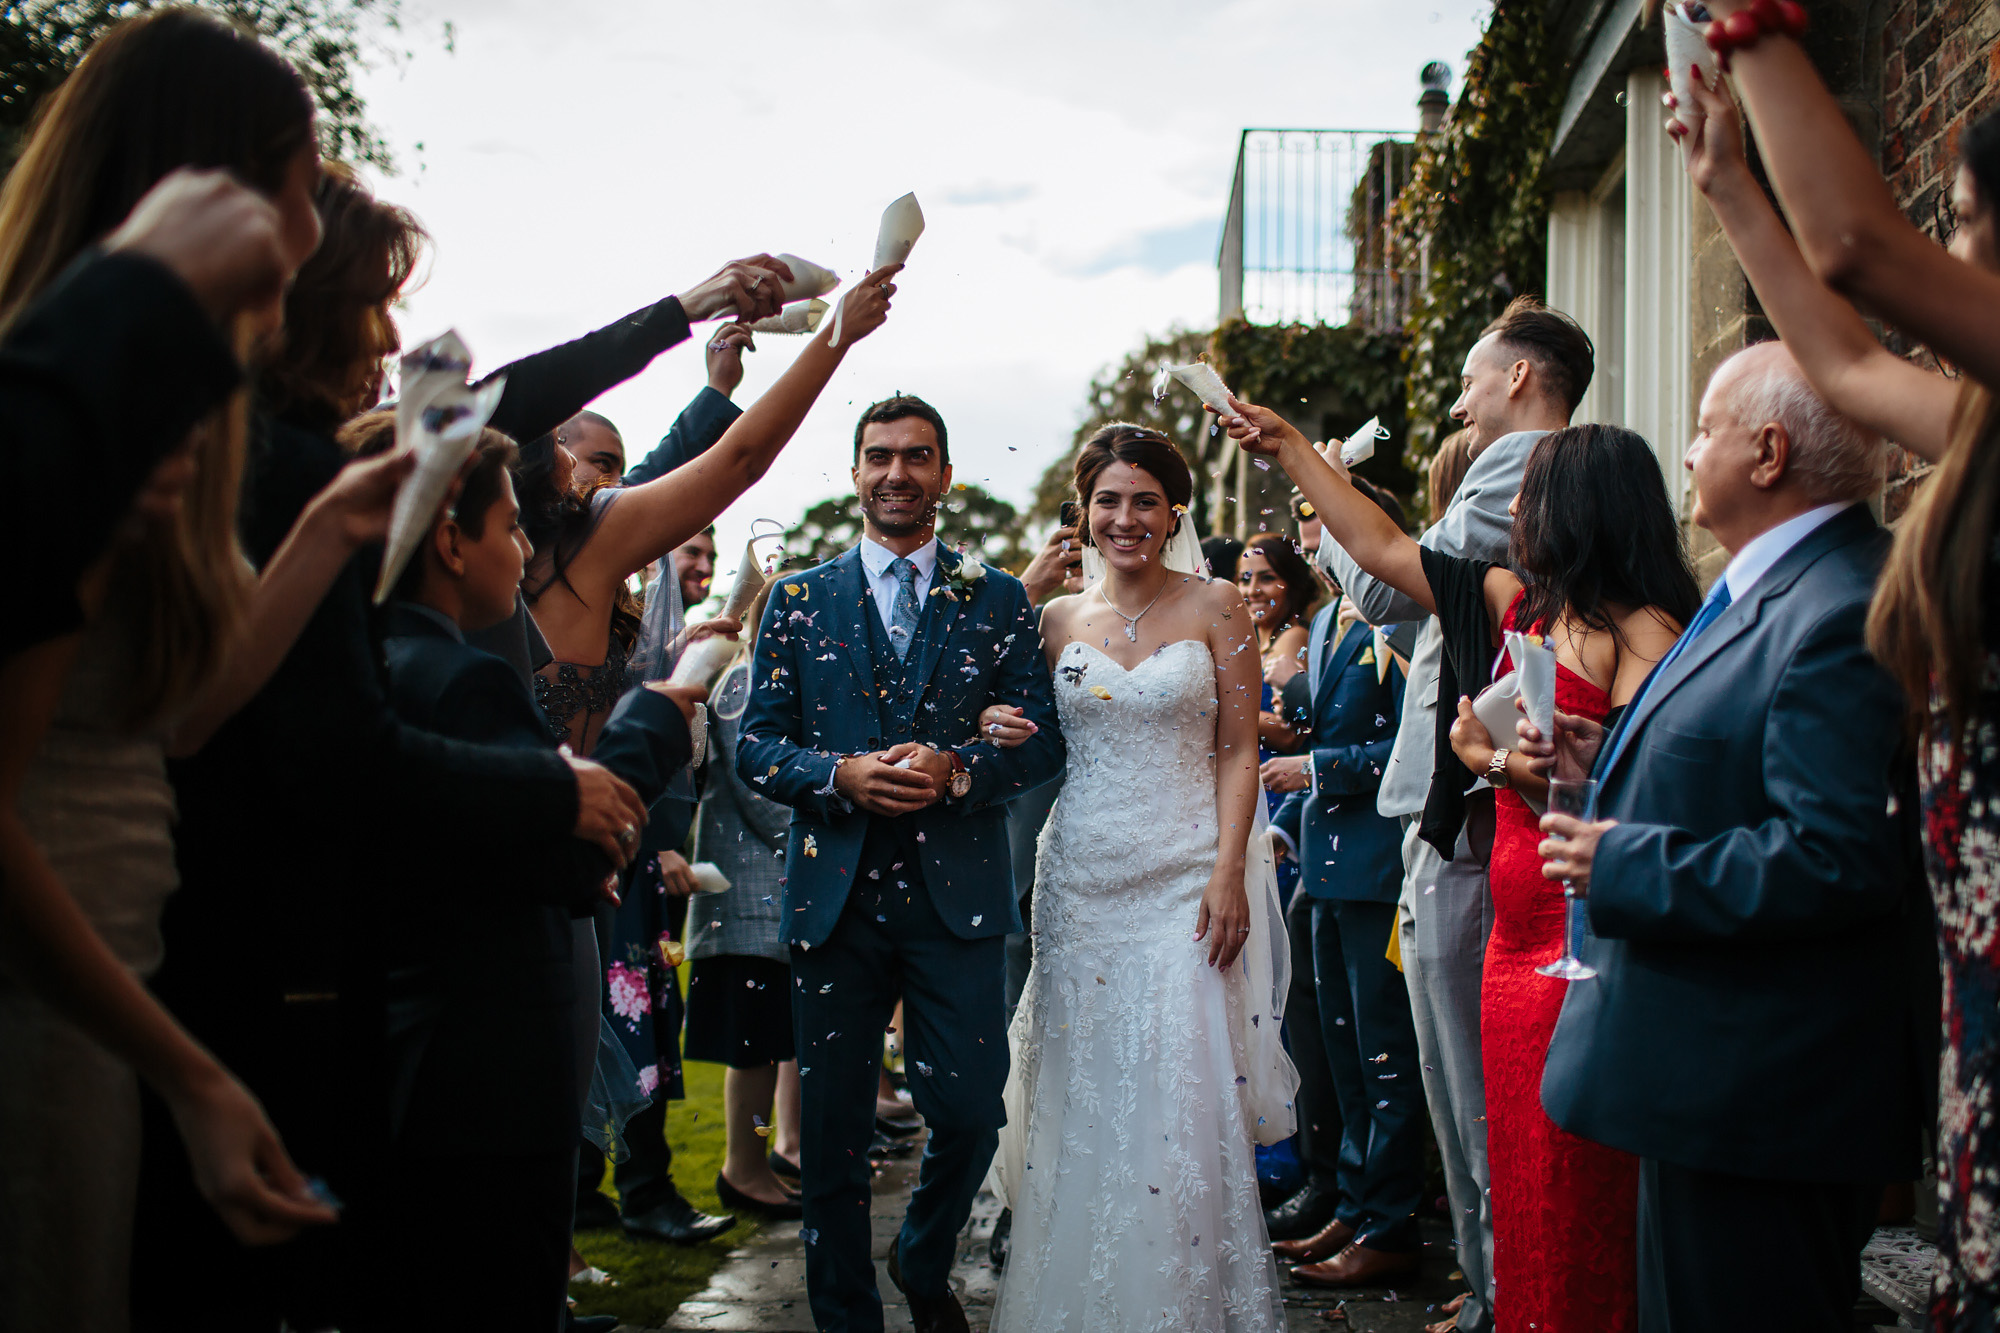 Throwing confetti at a wedding in Yorkshire